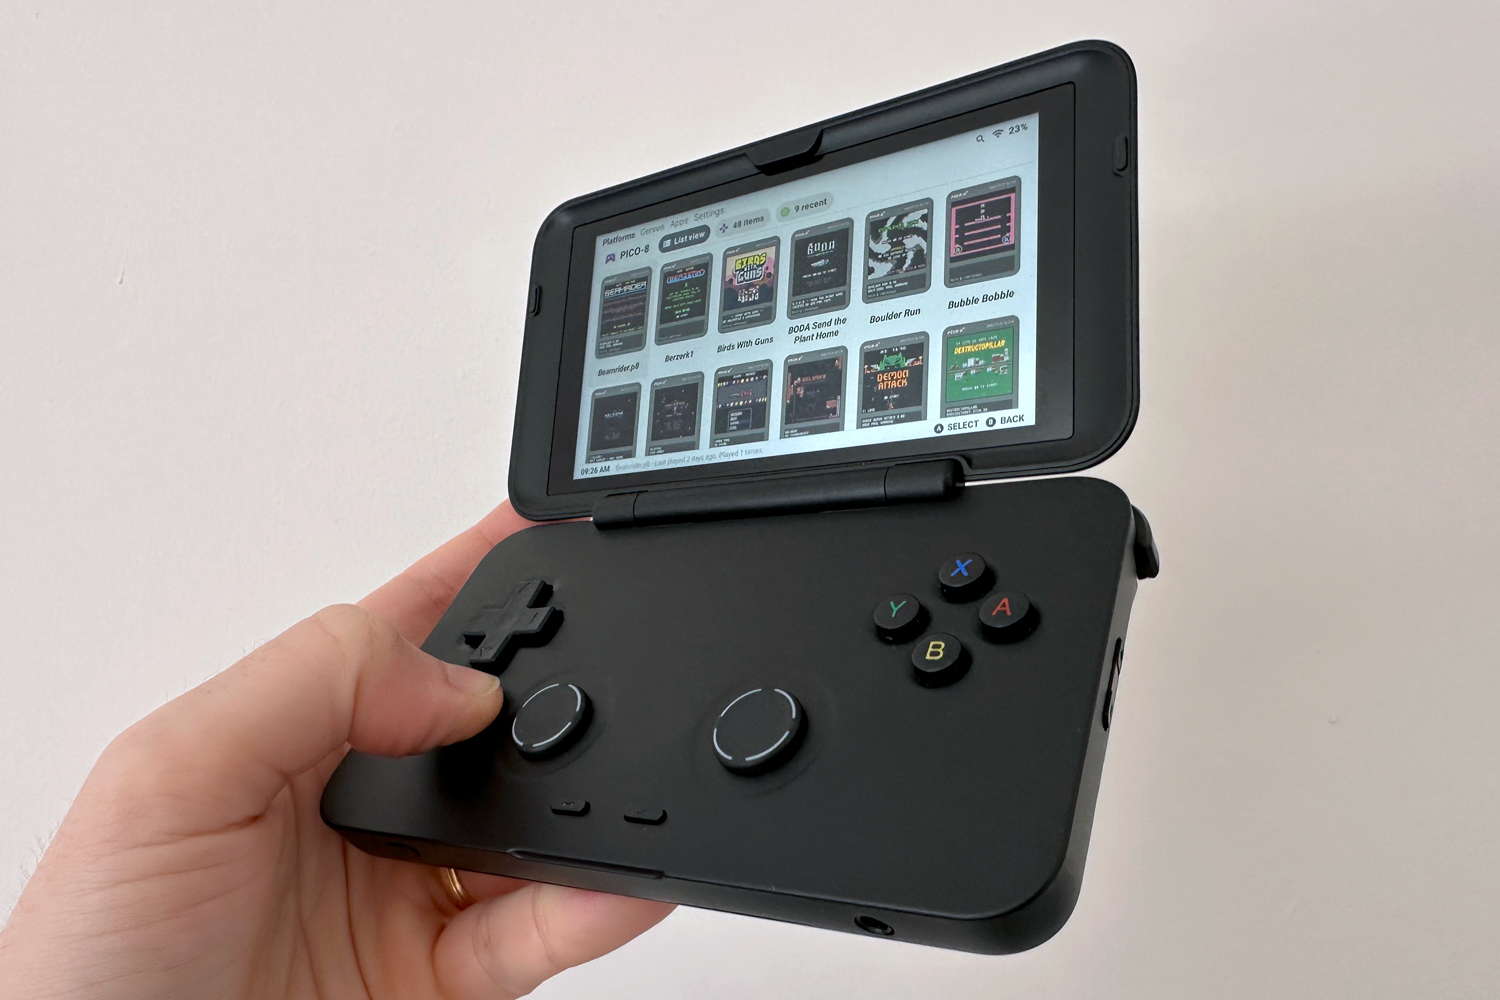 Retroid Pocket Flip review: decades of games in your pocket | Stuff